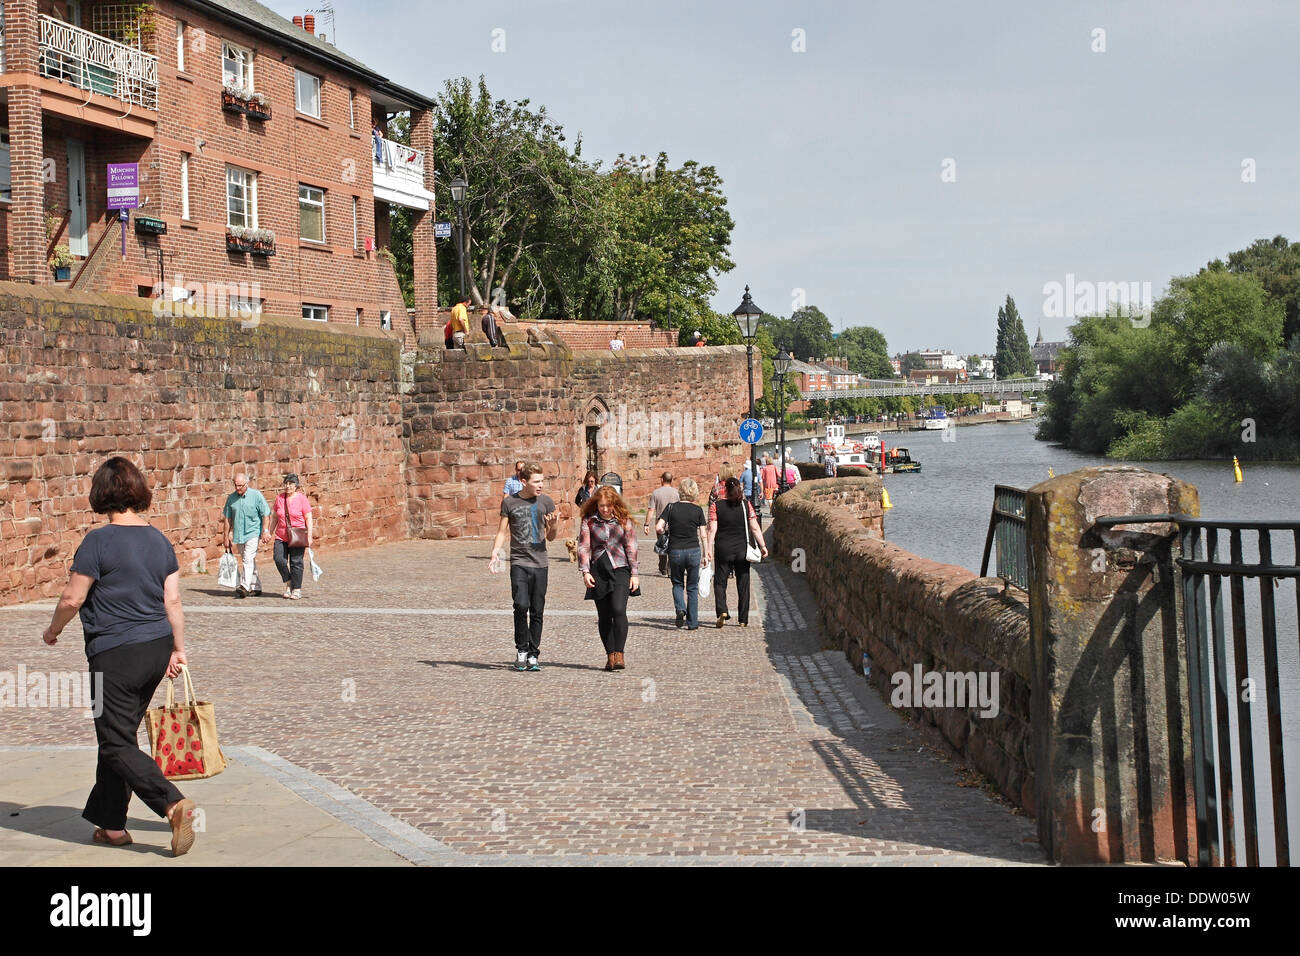 People walking along the riverside path close to the ancient city walls of Chester, England. Stock Photo